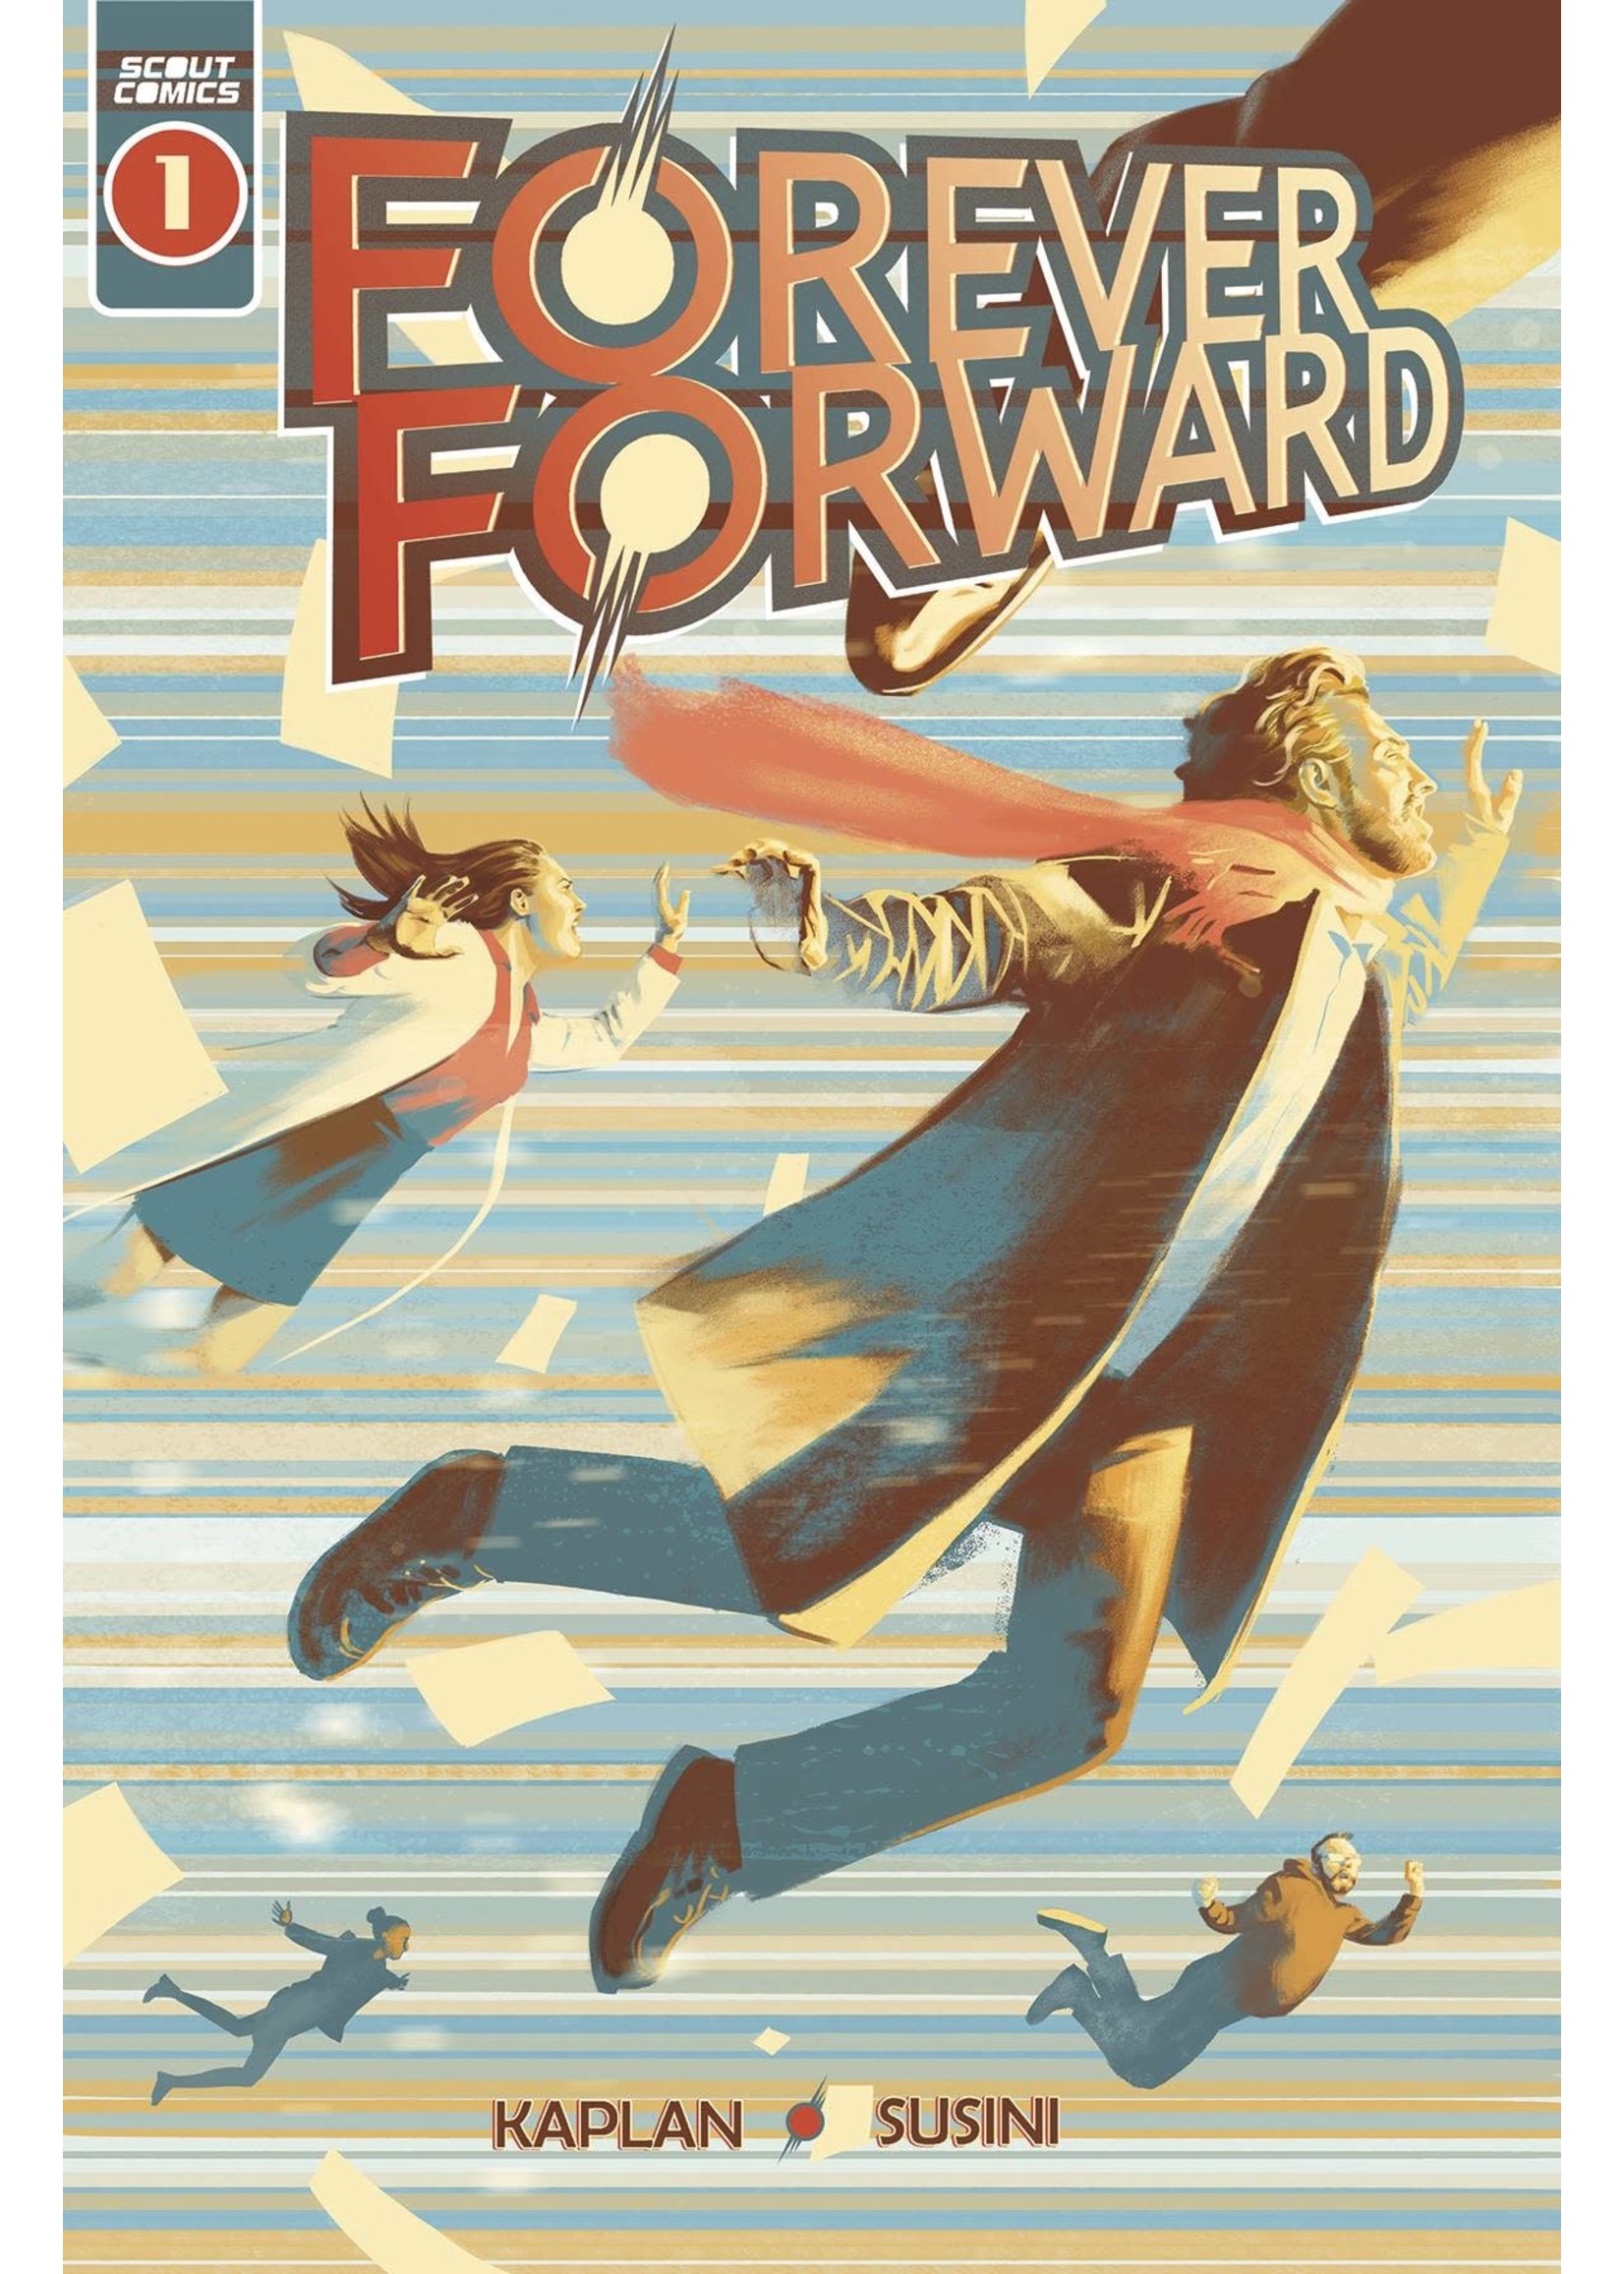 SCOUT COMICS FOREVER FORWARD complete 5 issue series